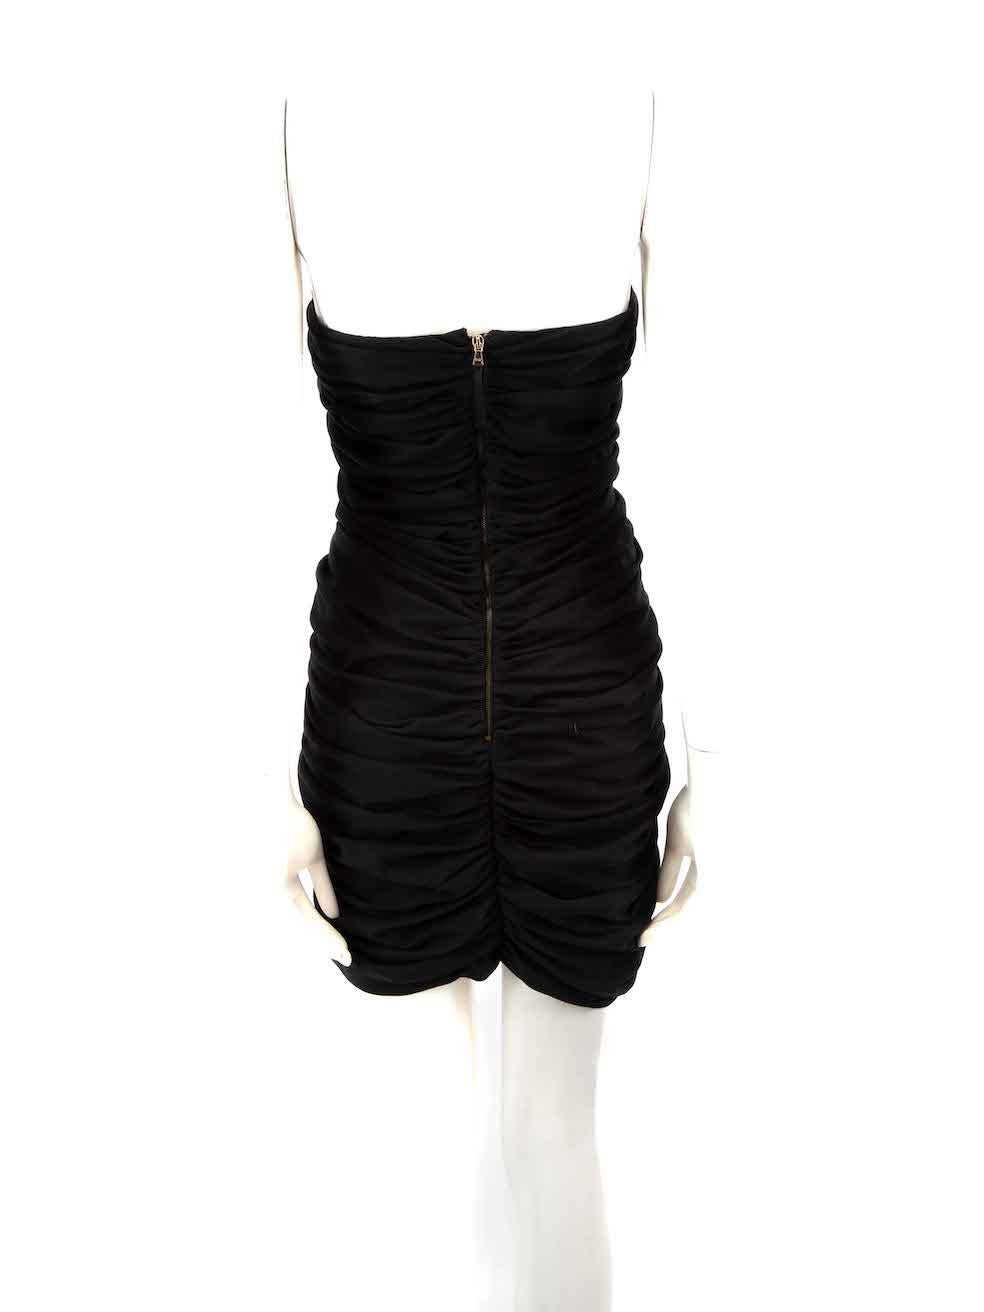 Dolce & Gabbana D&G 2010 Runway Black Lace Trim Corset Dress Size M In Good Condition For Sale In London, GB